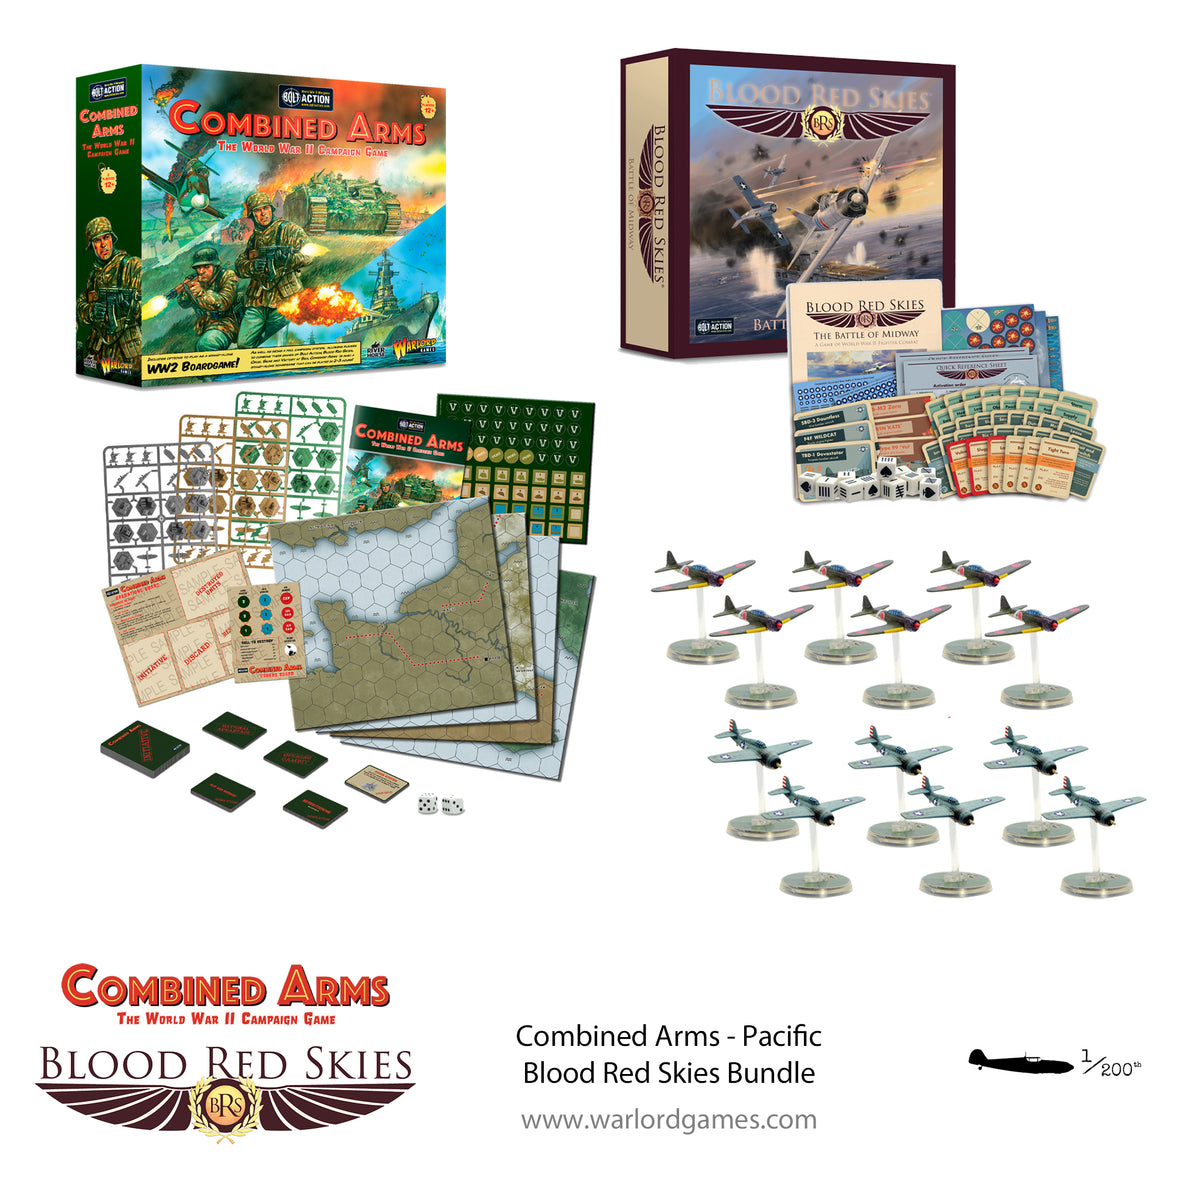 Combined Arms – Pacific Blood Red Skies Bundle